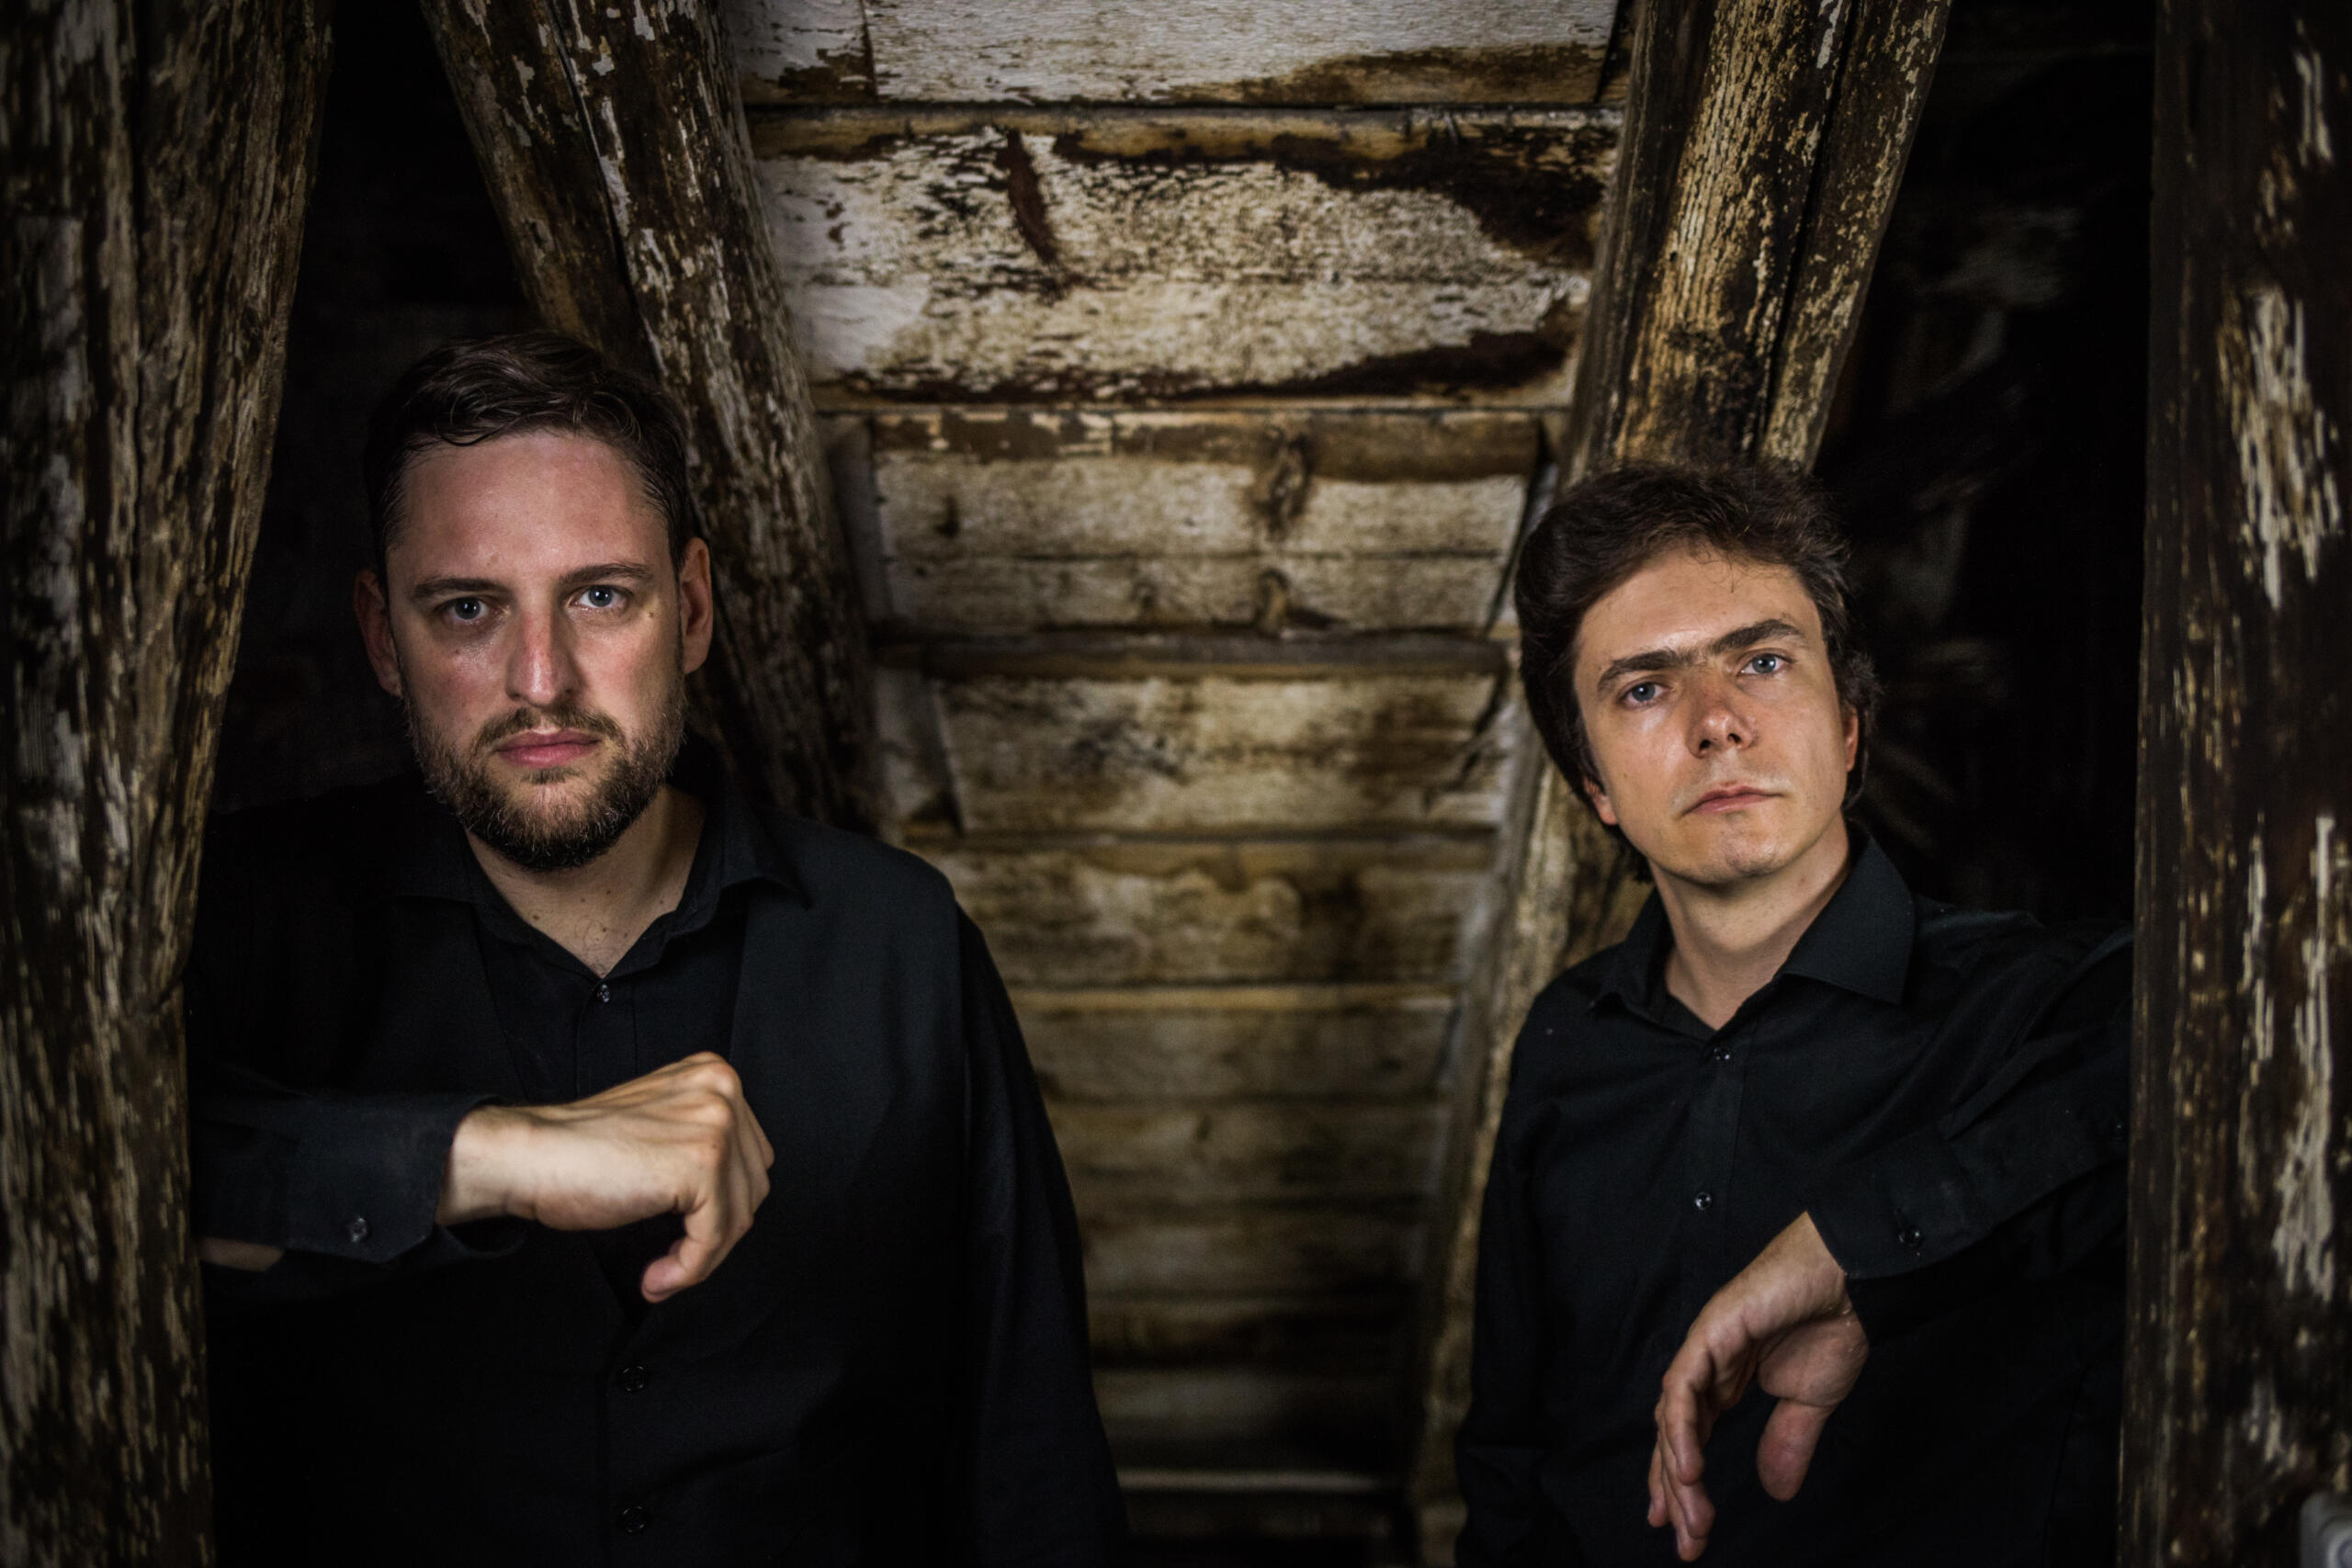 Two men dressed in black from a background of old wooden beams.